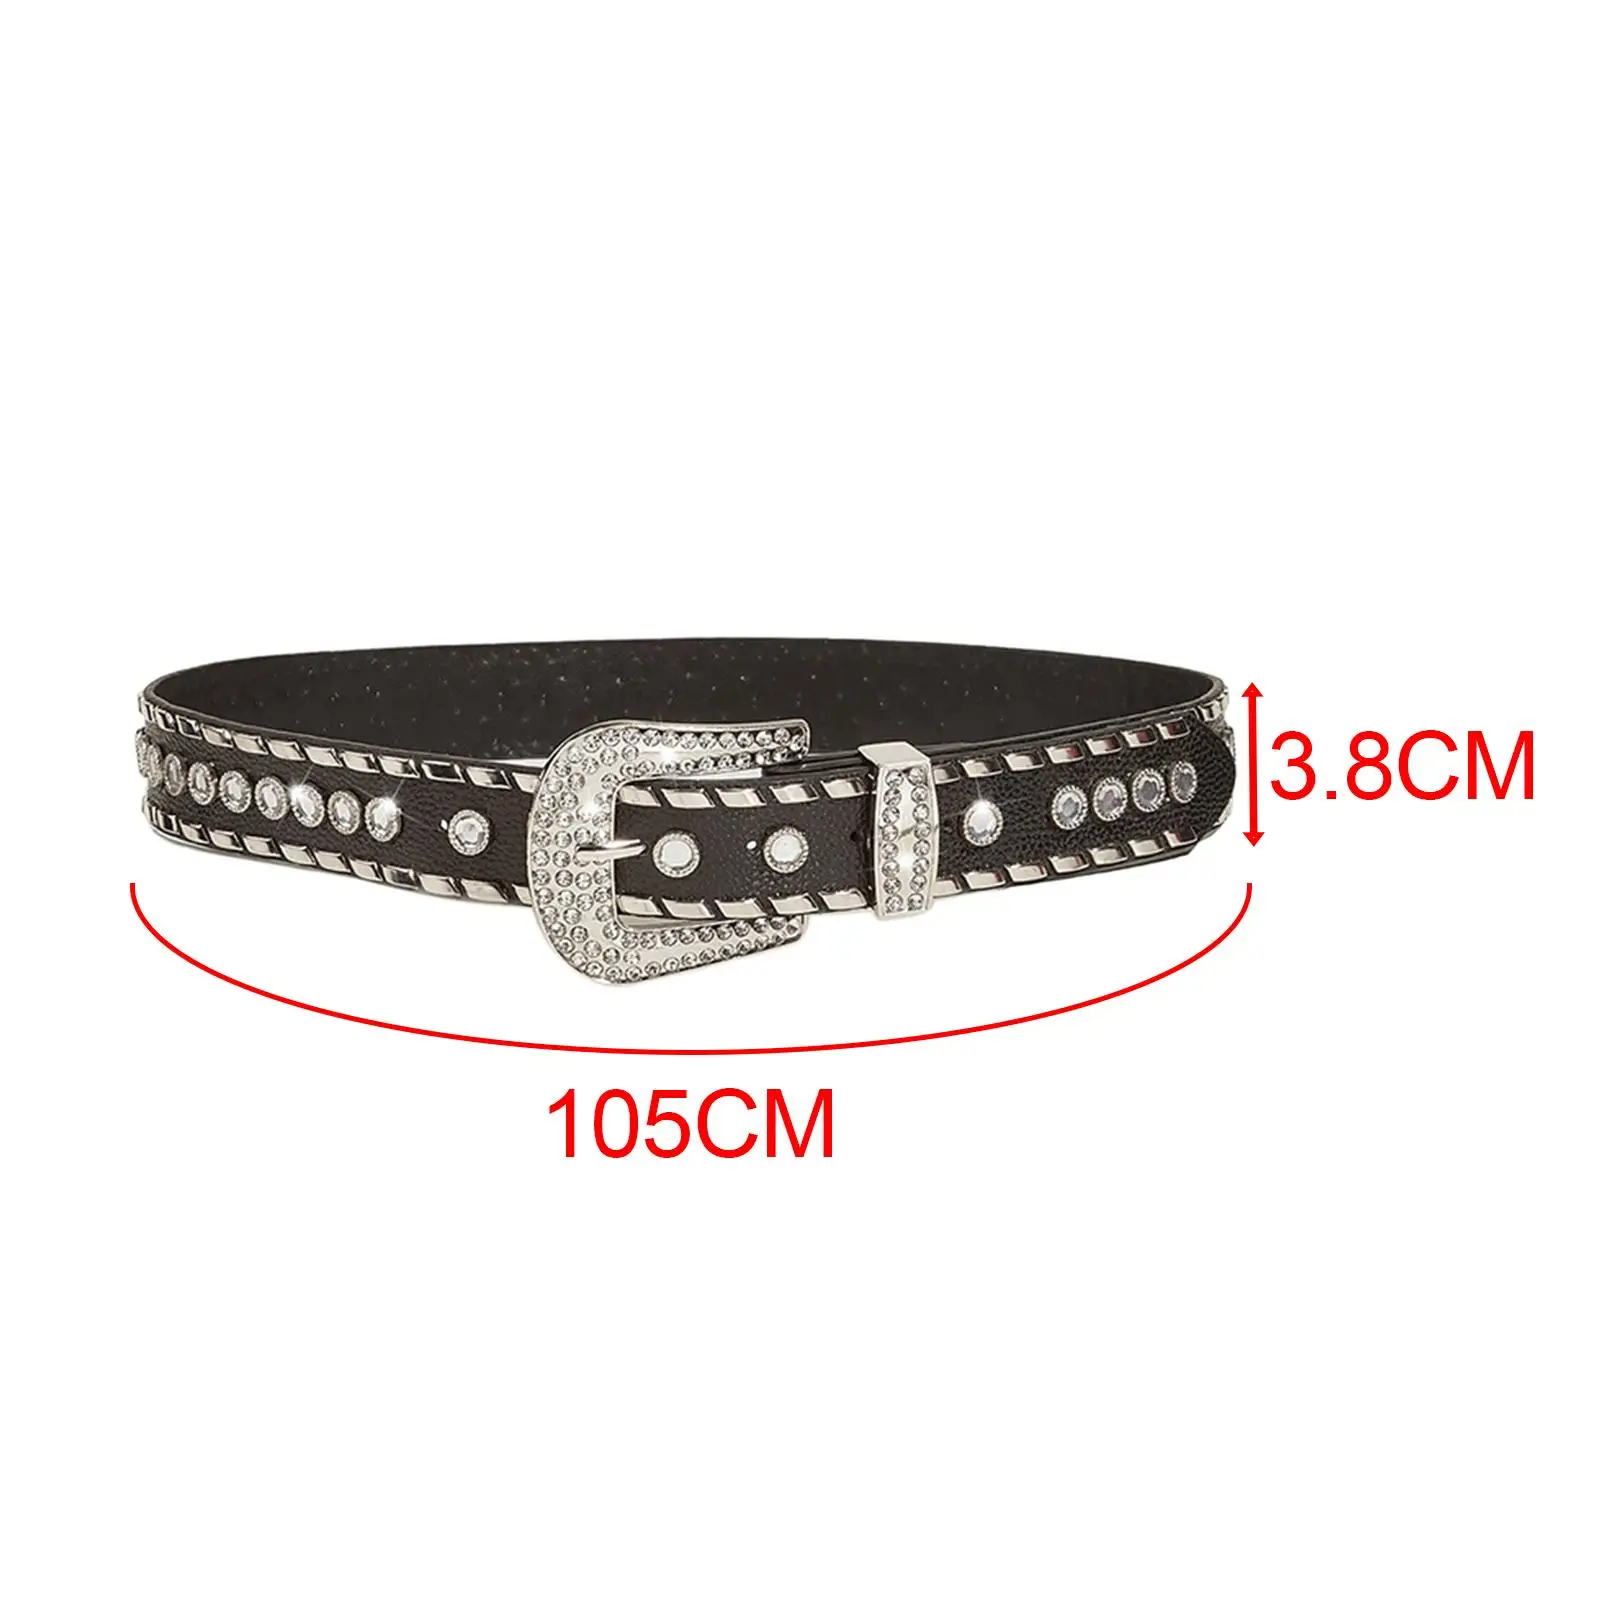 Width 3.8cm Pin Buckle Waistband Strap Prong Buckle Costume Accessories Adjustable 105cm PU Women Waist Belt for Casual Jeans